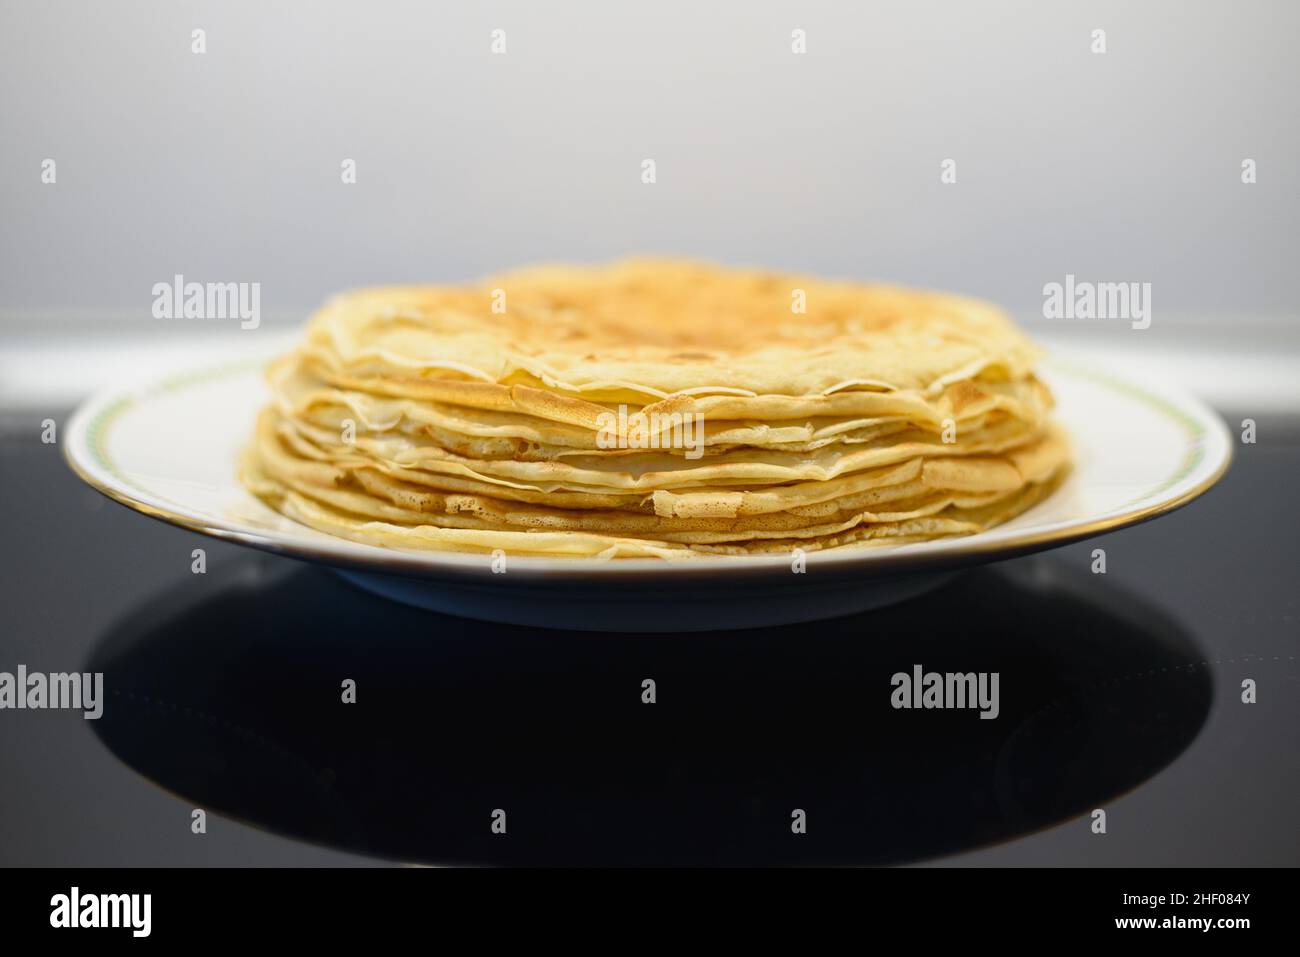 Stack of crepes or thin pancakes in a plate Stock Photo